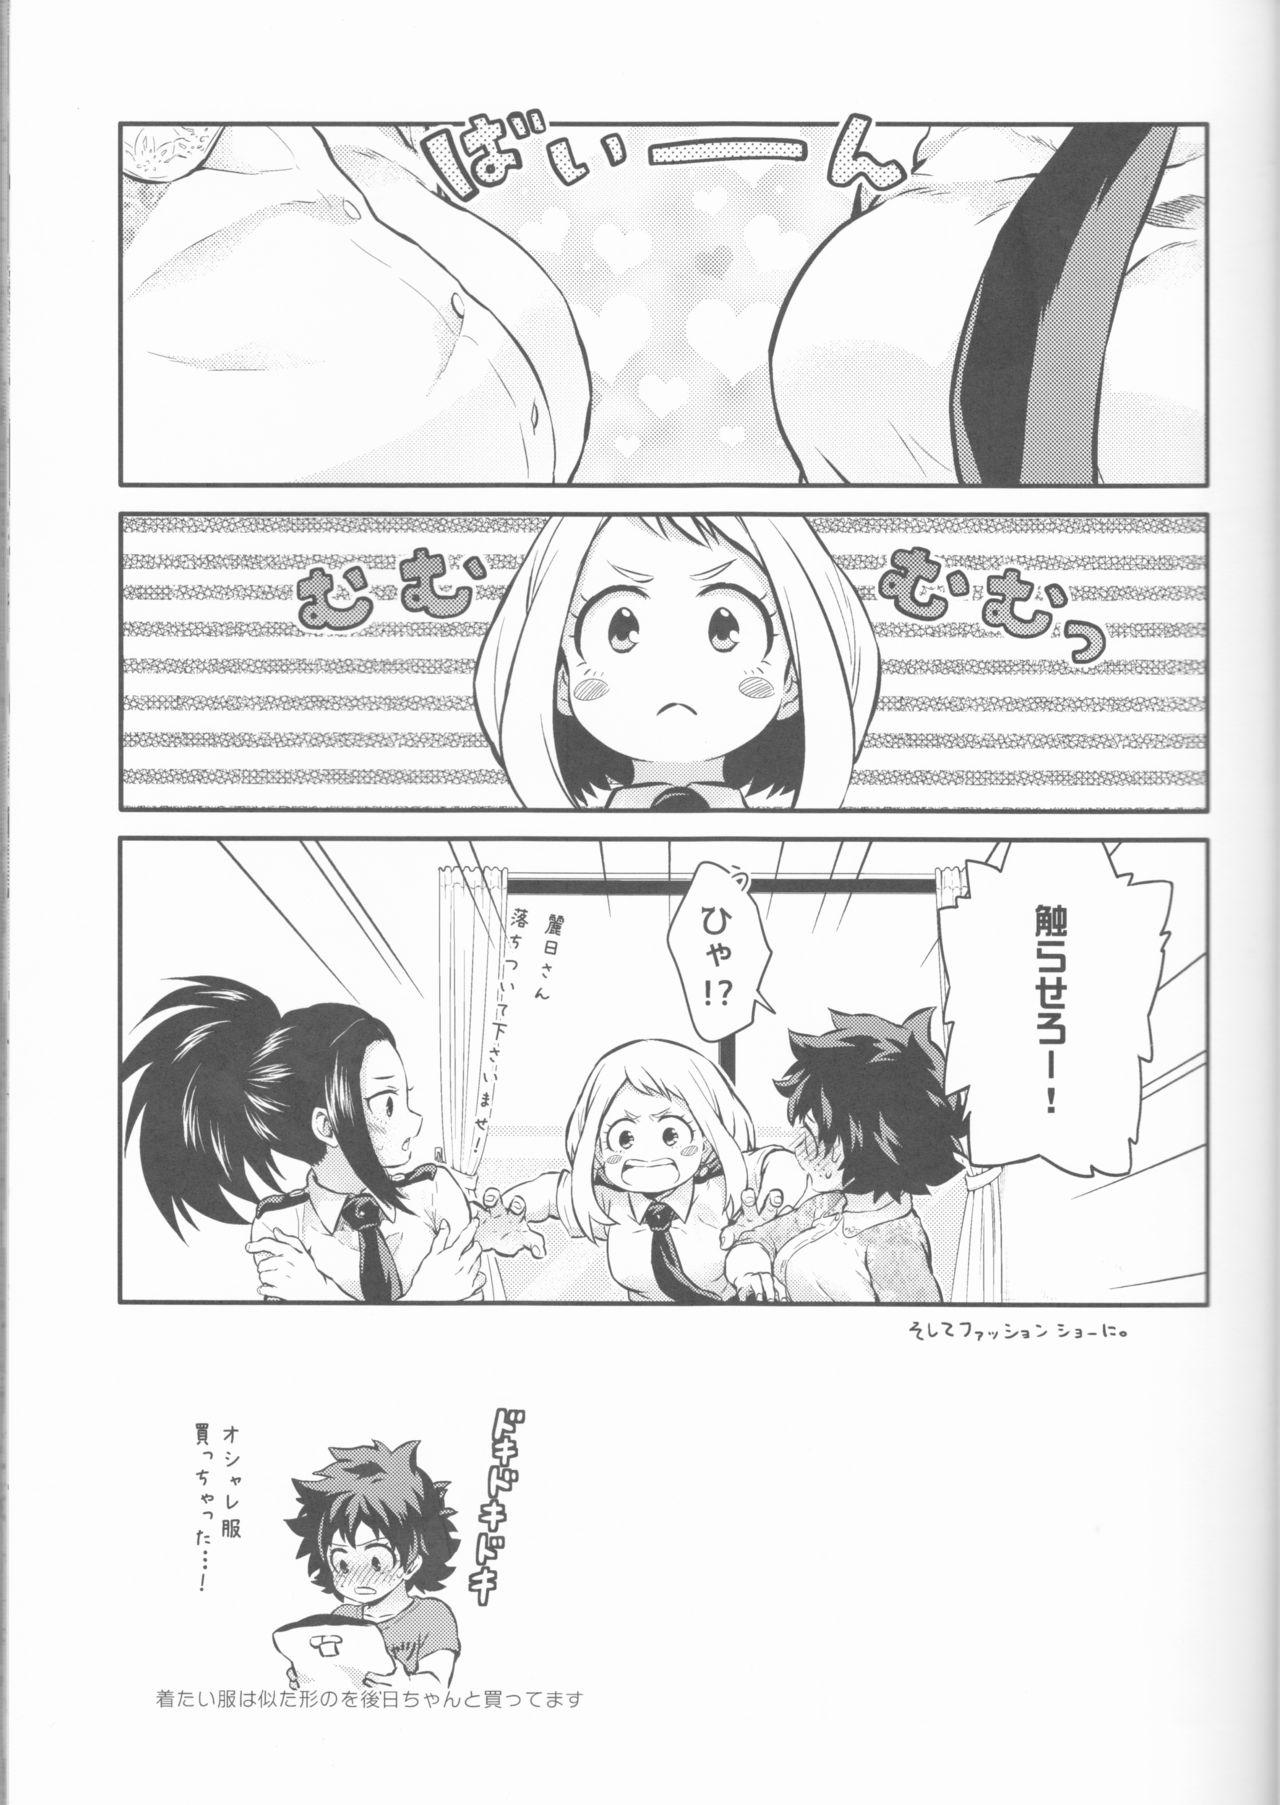 Family Love Me Tender another story - My hero academia Letsdoeit - Page 7